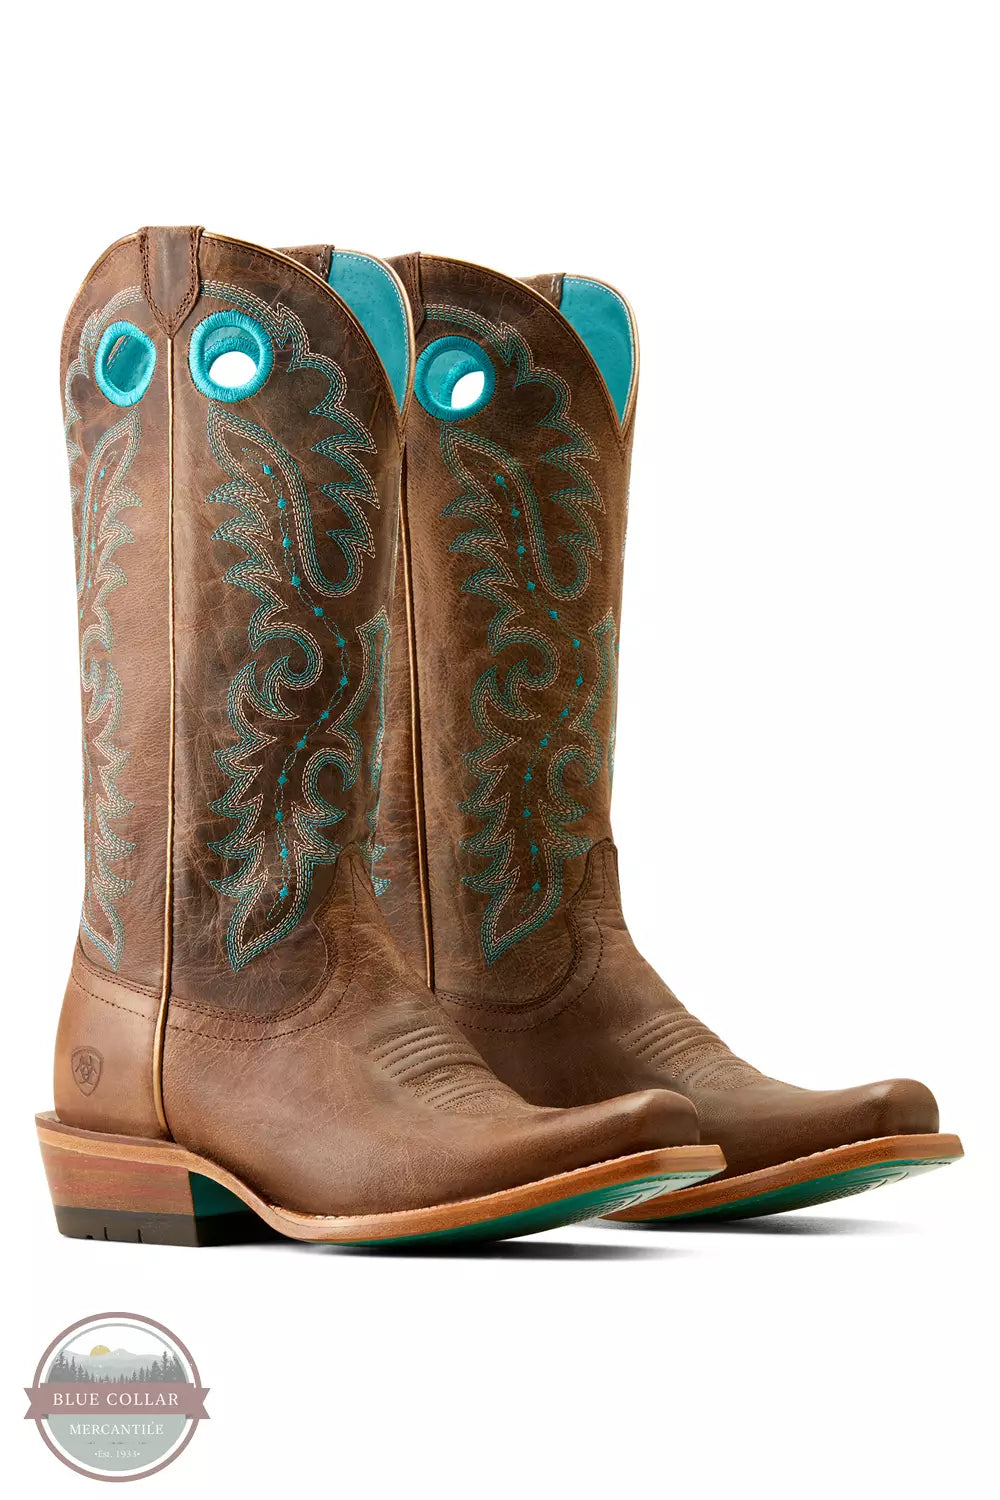 Ariat 10050889 Frontier Boon Western Boots in Pecan Brown Pair Profile View